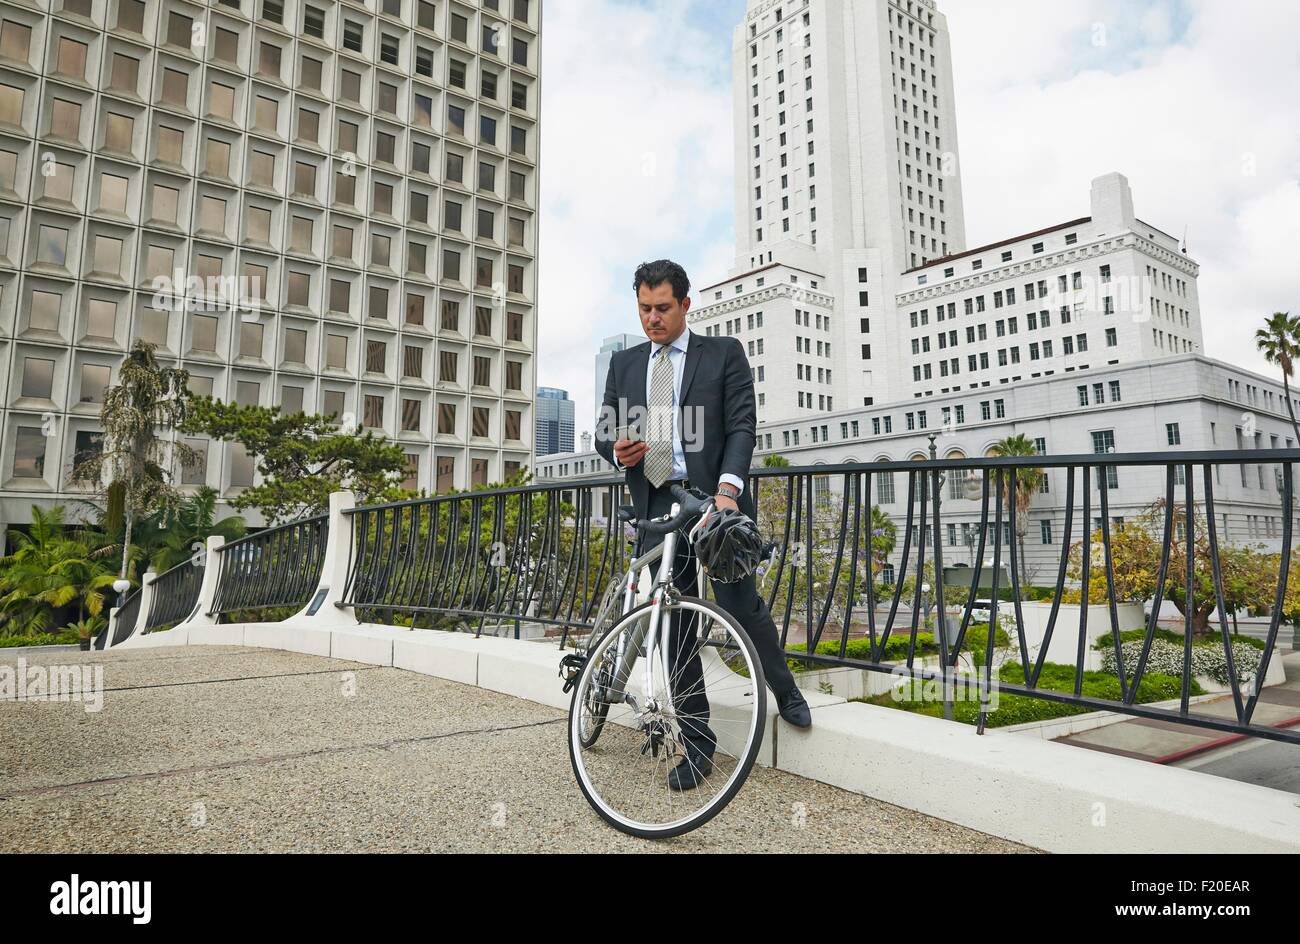 Business man on elevated walkway with bicycle looking at smartphone, Los Angeles City Hall, California, USA Stock Photo